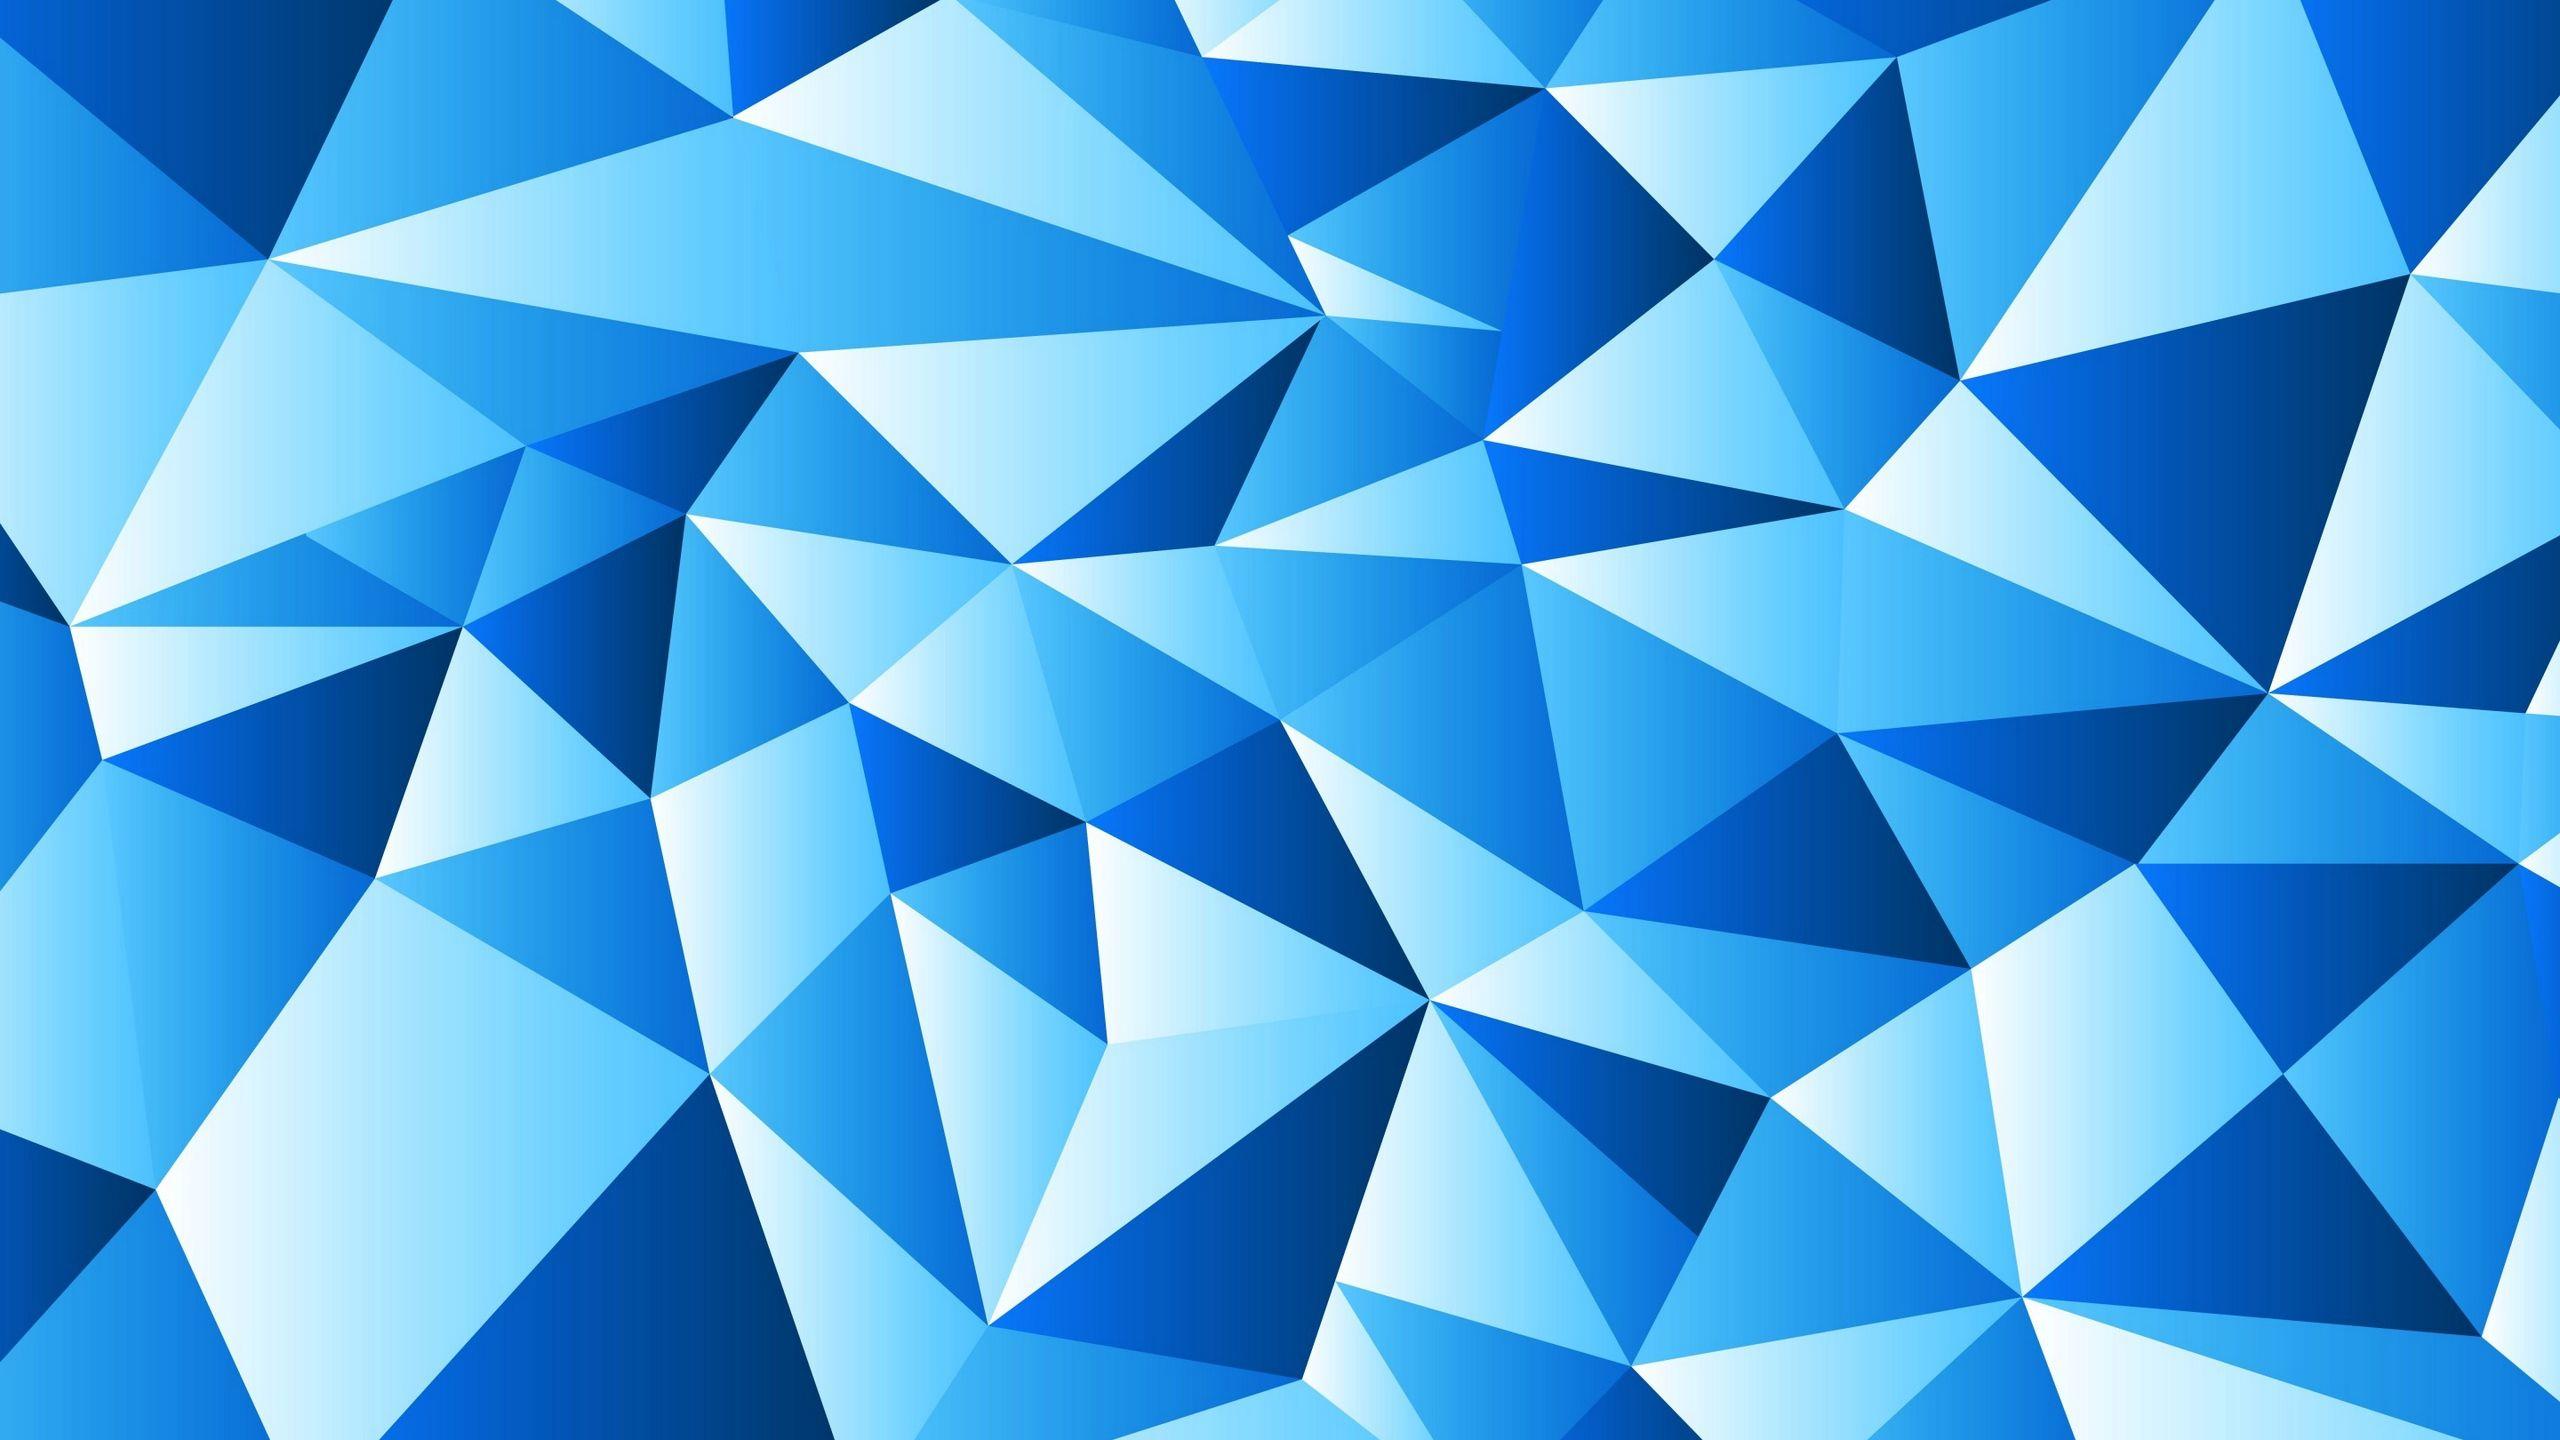 9 Blue Triangle Logo - Download wallpaper 2560x1440 triangles, abstract, blue widescreen 16 ...